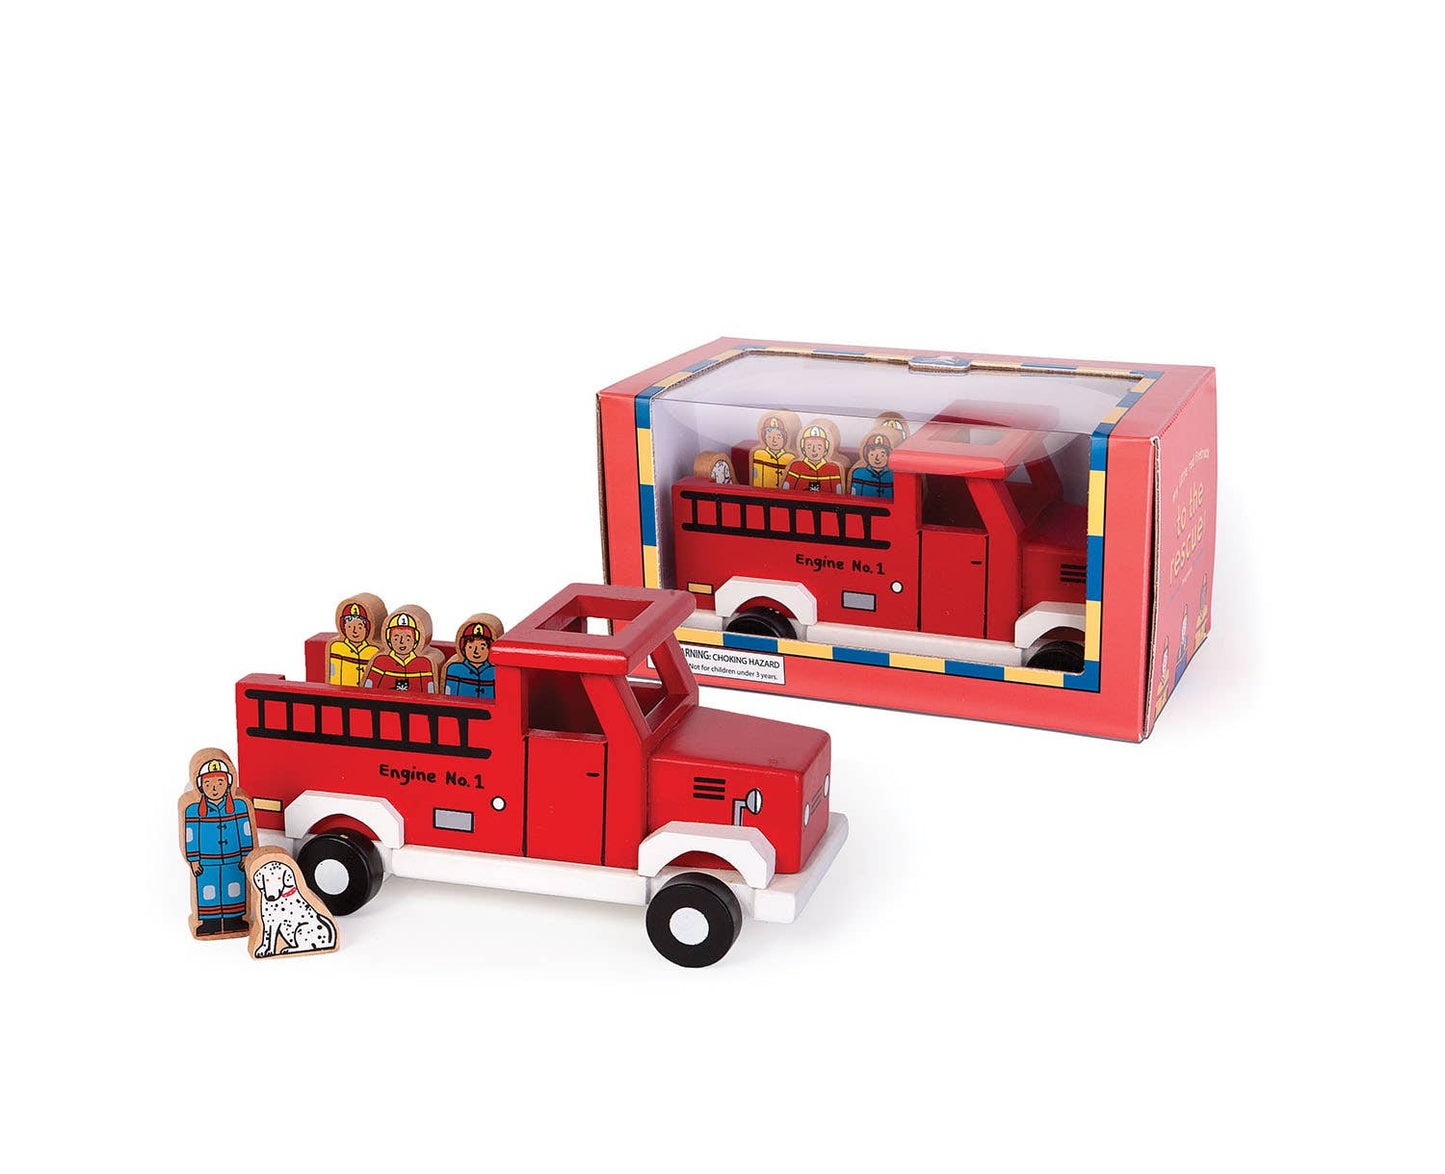 Jack Rabbit Creations to the rescue fire truck